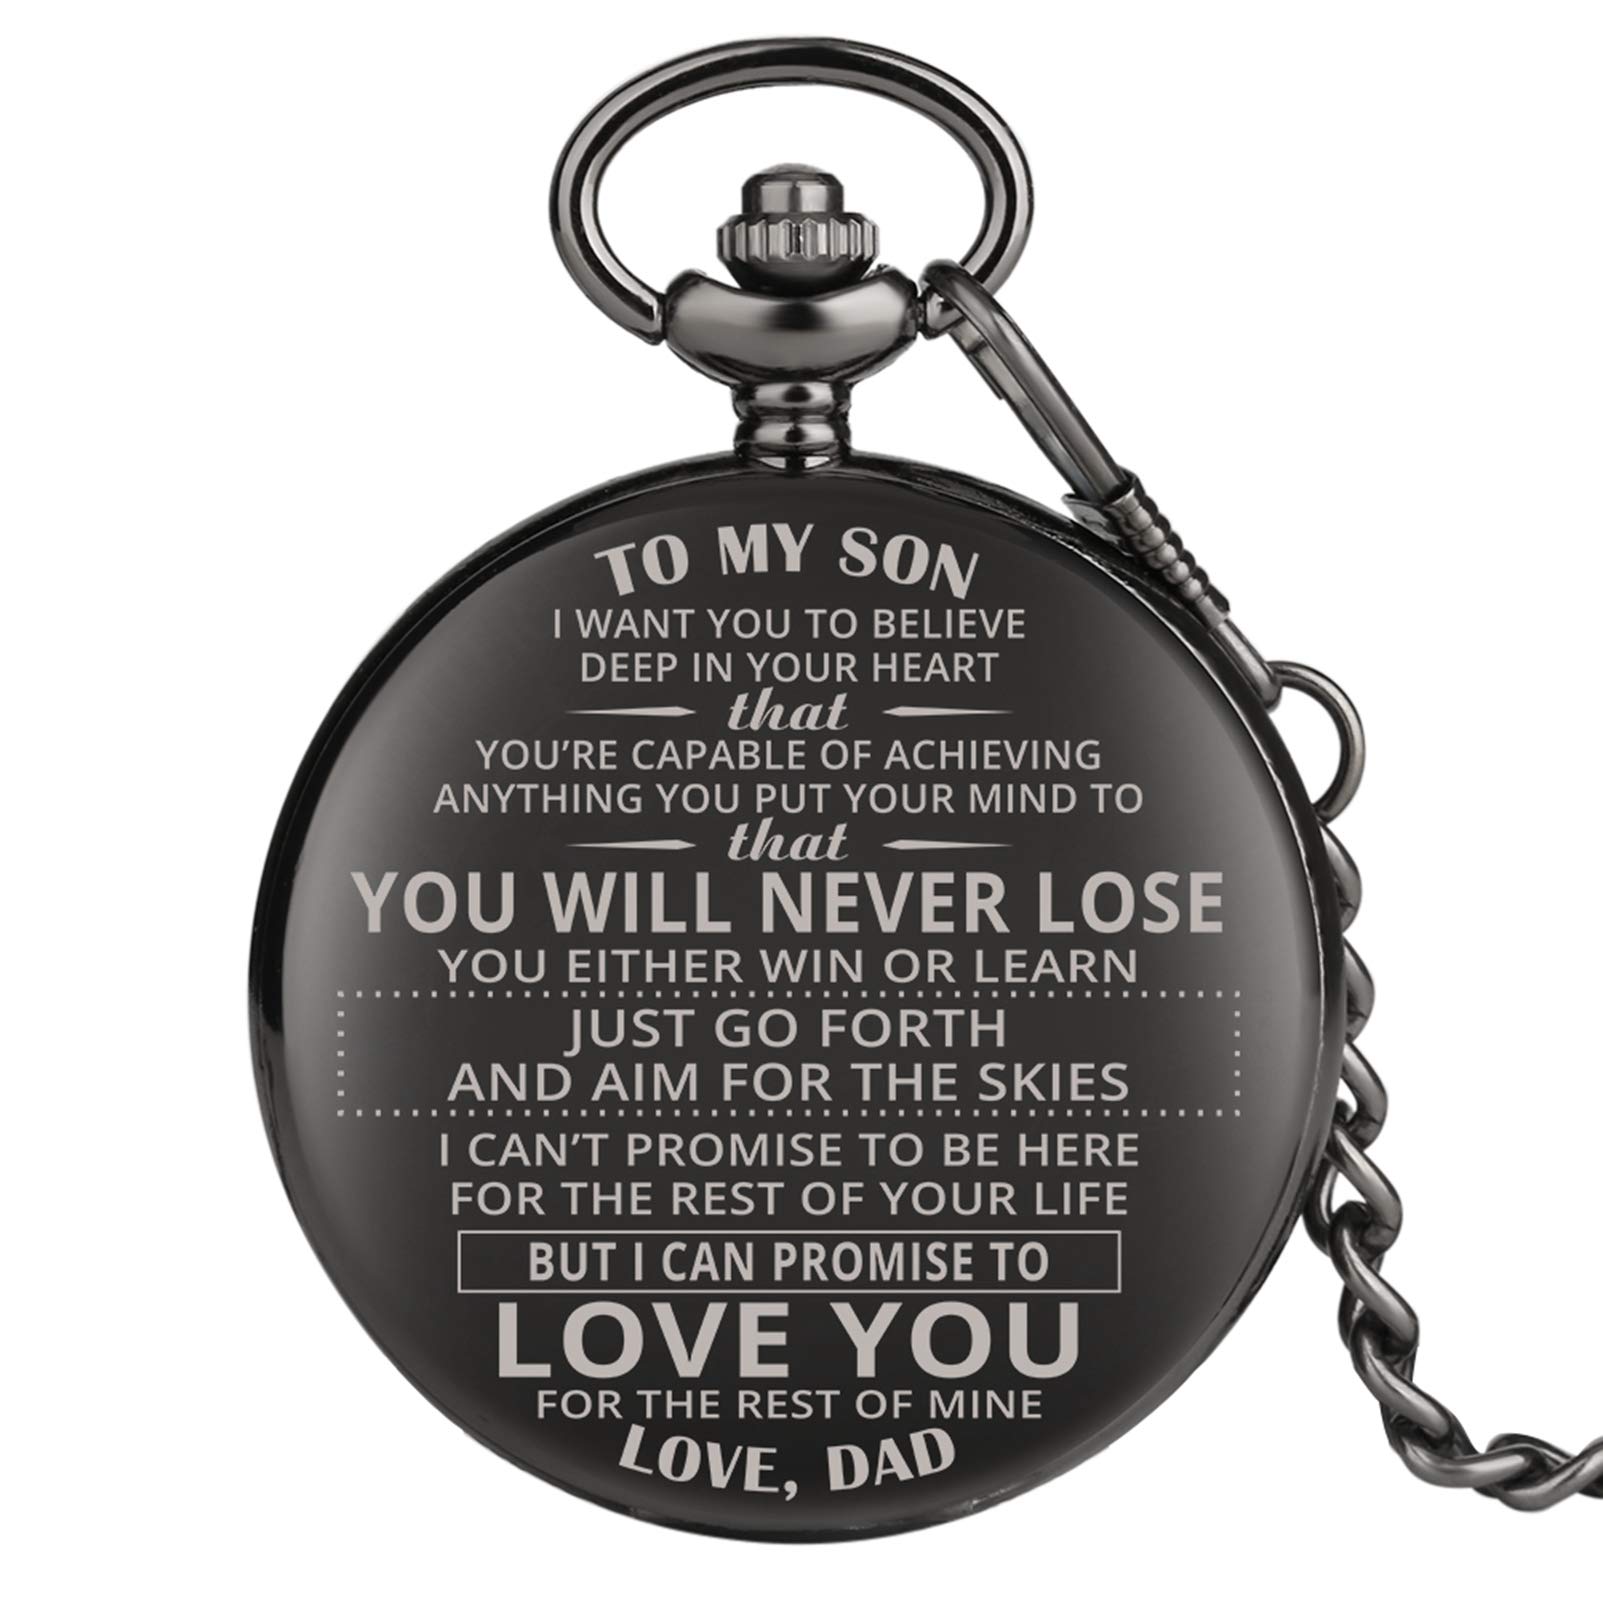 Engraved Pocket Watch, Pocket Watch for Boys, Personalized Gift